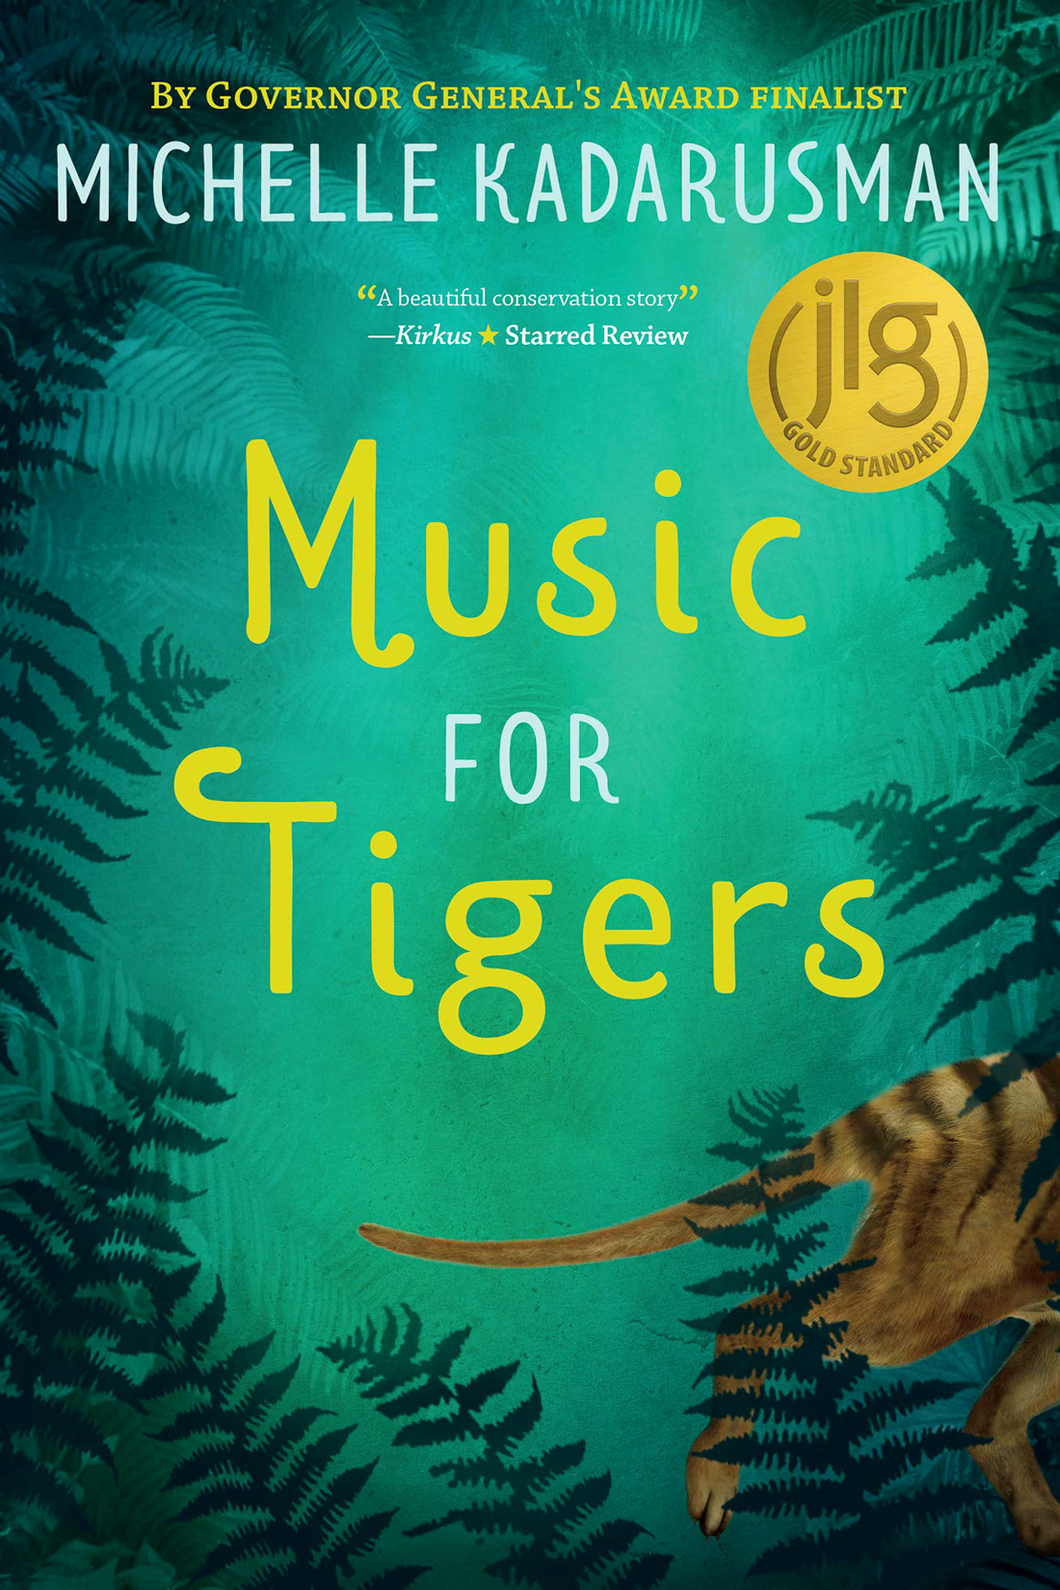 Music for Tigers by Michelle Kadarusman / Hardcover or Paperback - NEW BOOK